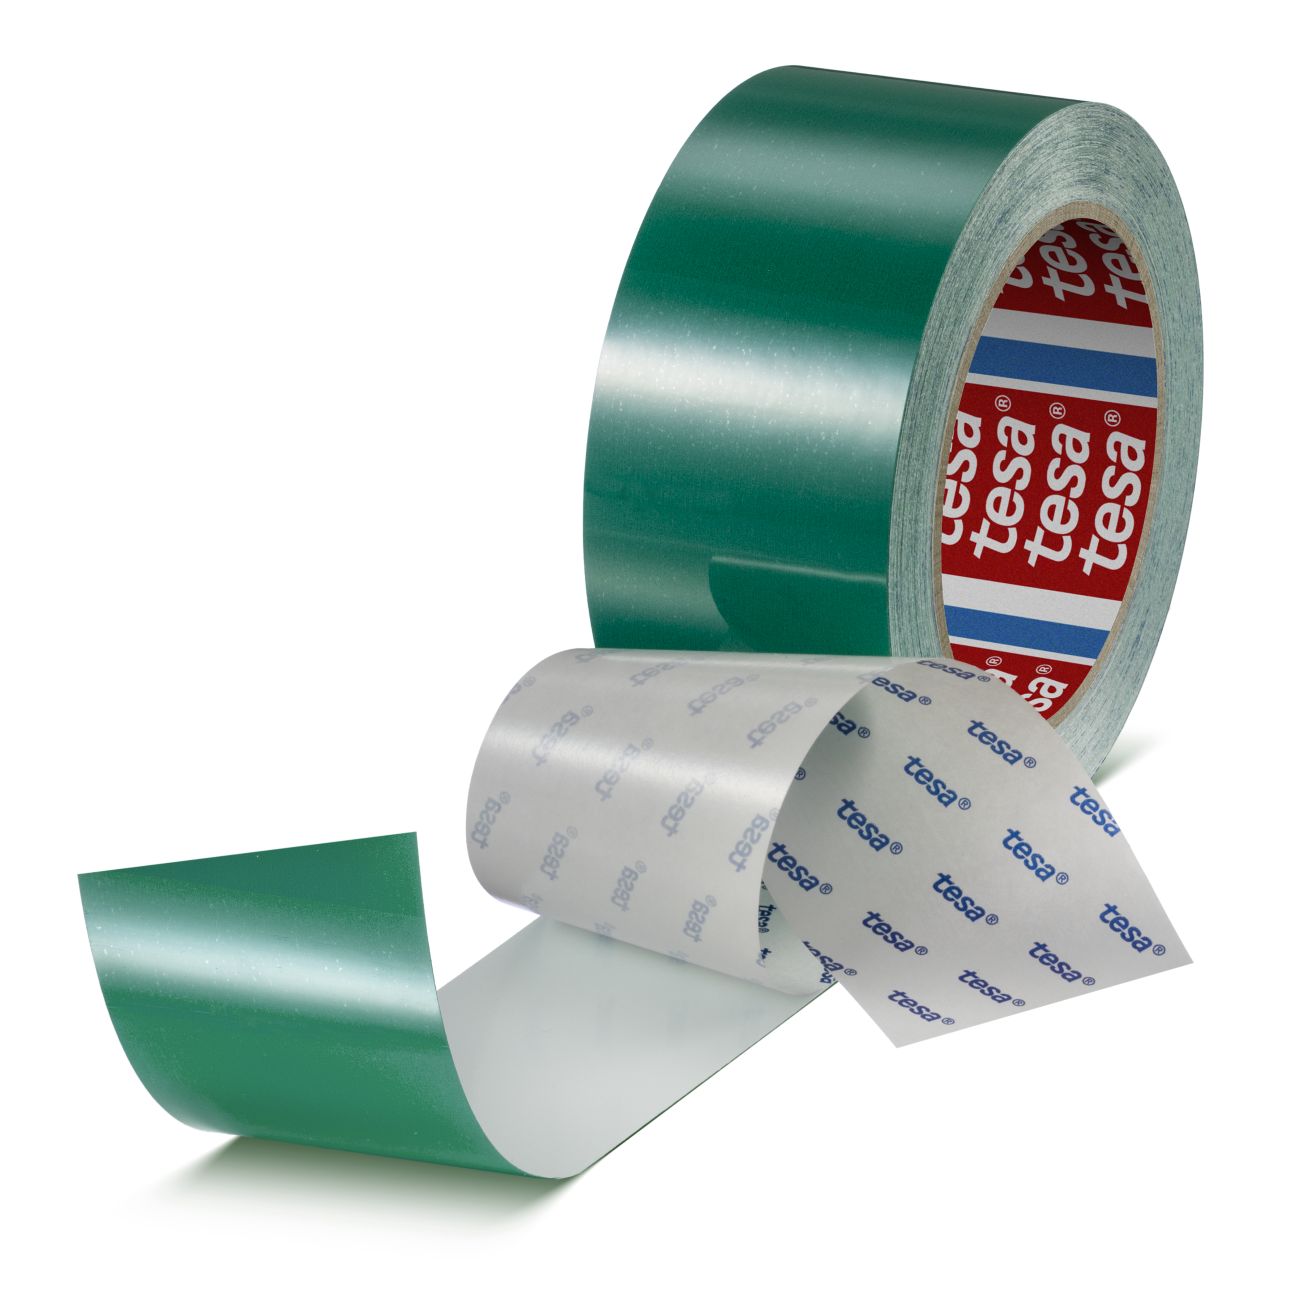 tesa 60960 Durable and scratch-resistant floor marking tape 50mmx20m green